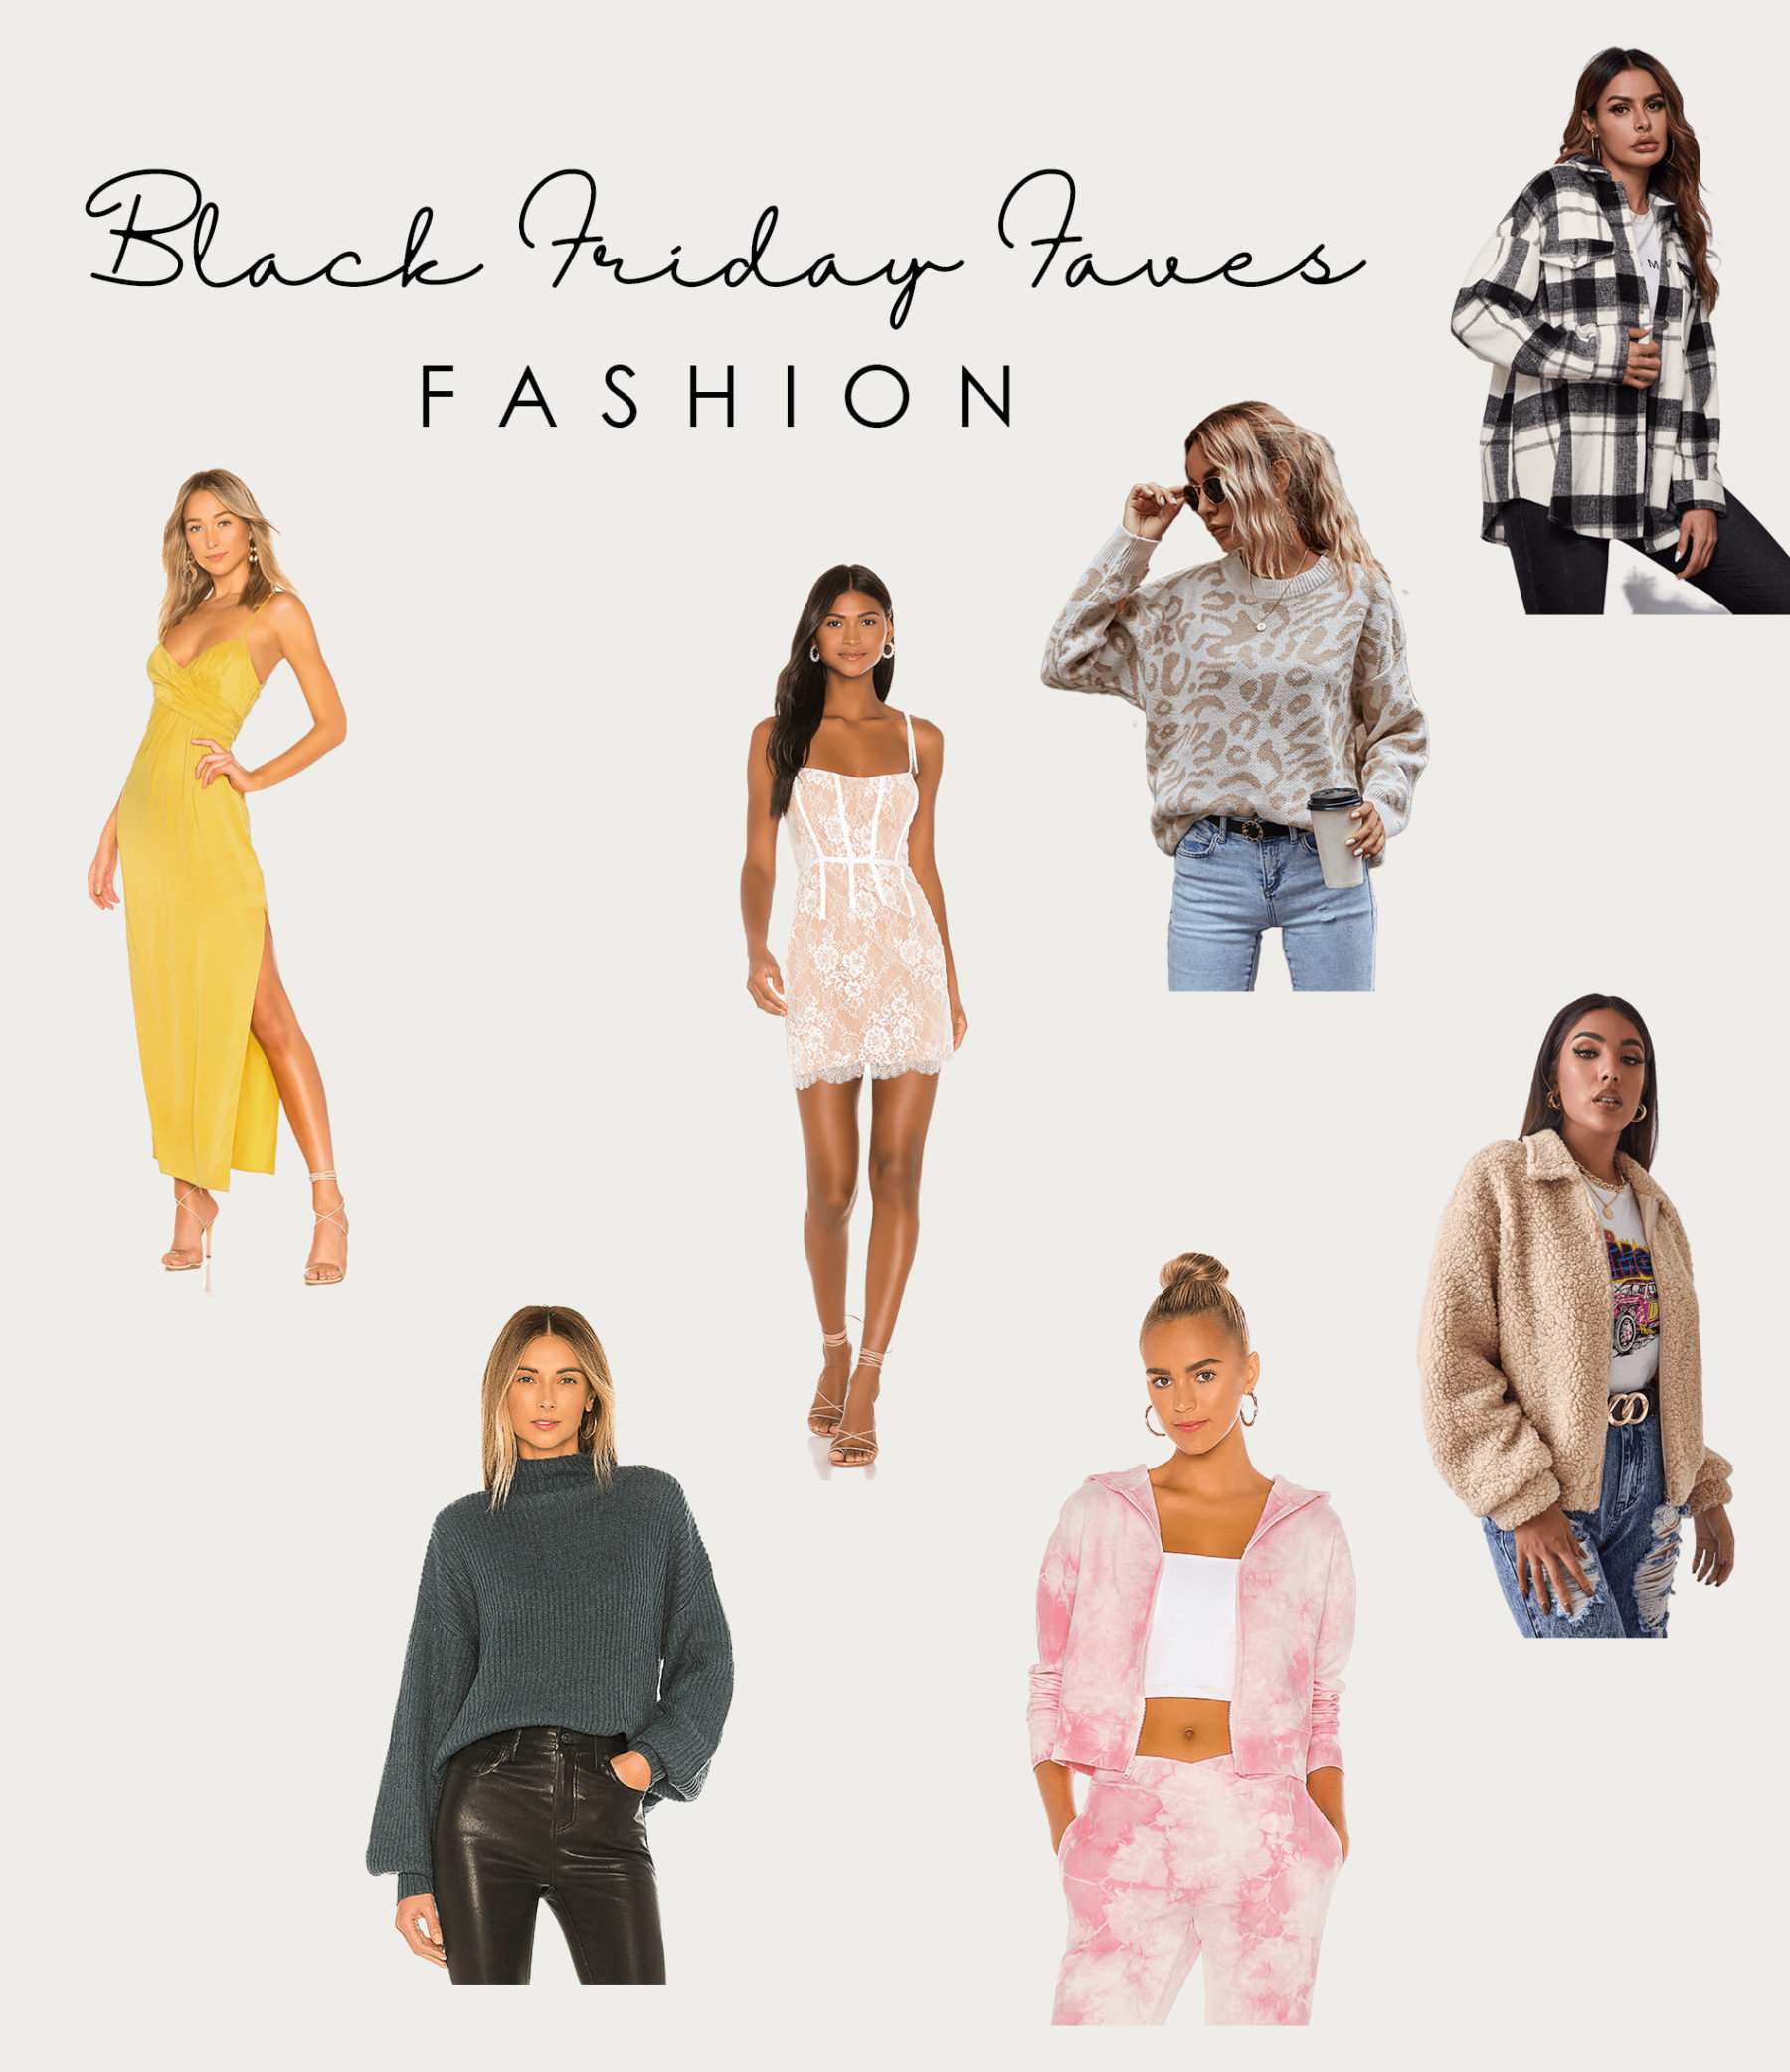 Black Friday Fashion | Black Friday Deals | Gift Guide